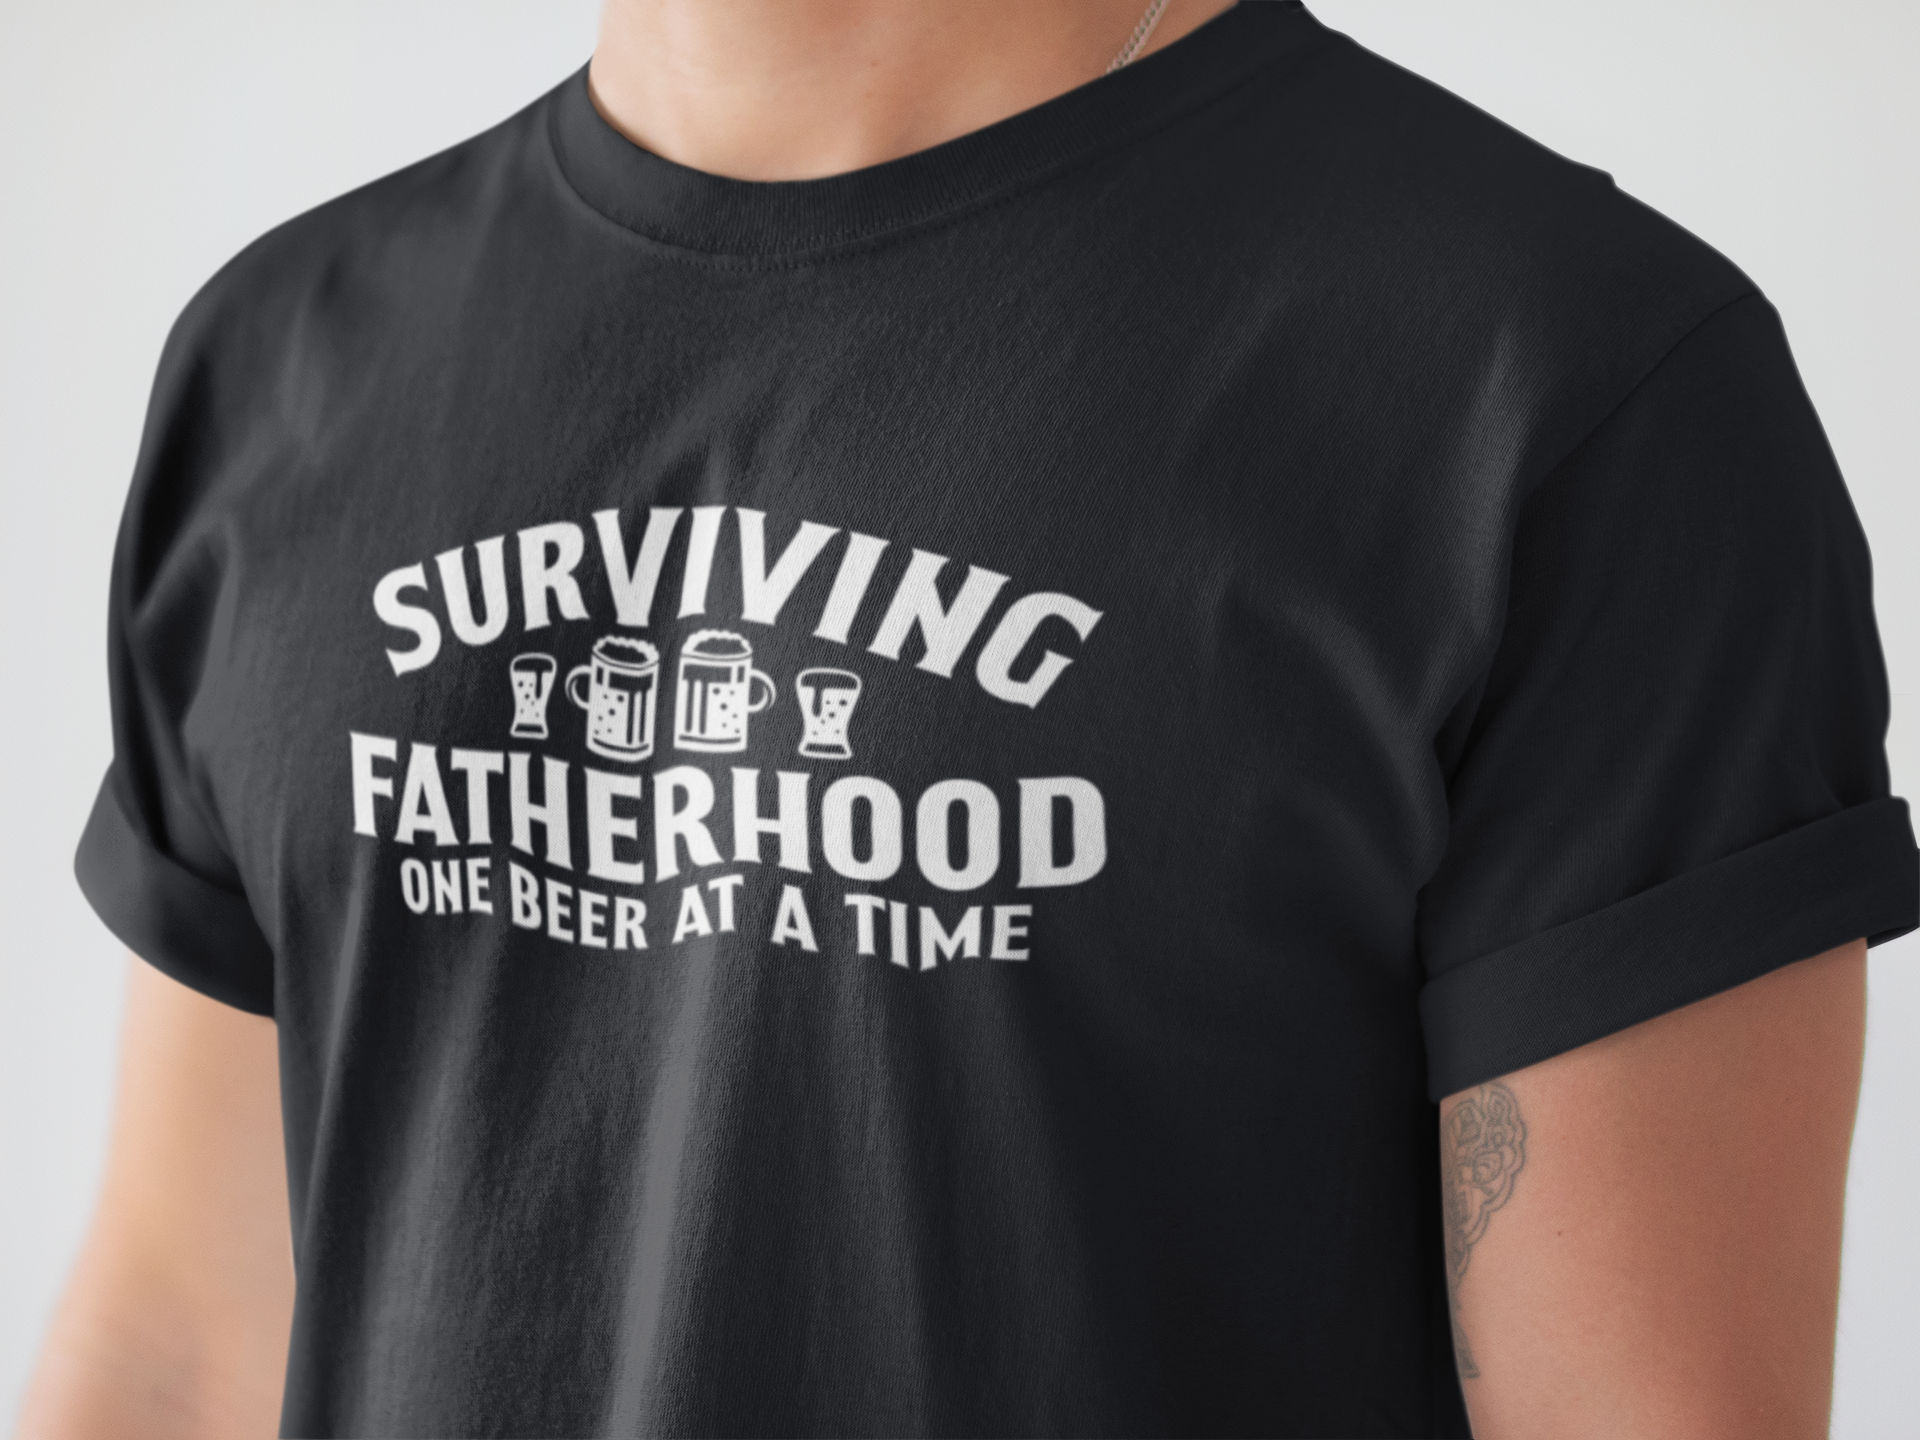 Surviving Fatherhood One Beer At A Time - Black T-Shirt - front view in white writing. Between the word surviving and fatherhood is different glasses of beer mugs. This is the front view of the shirt up close on a model.